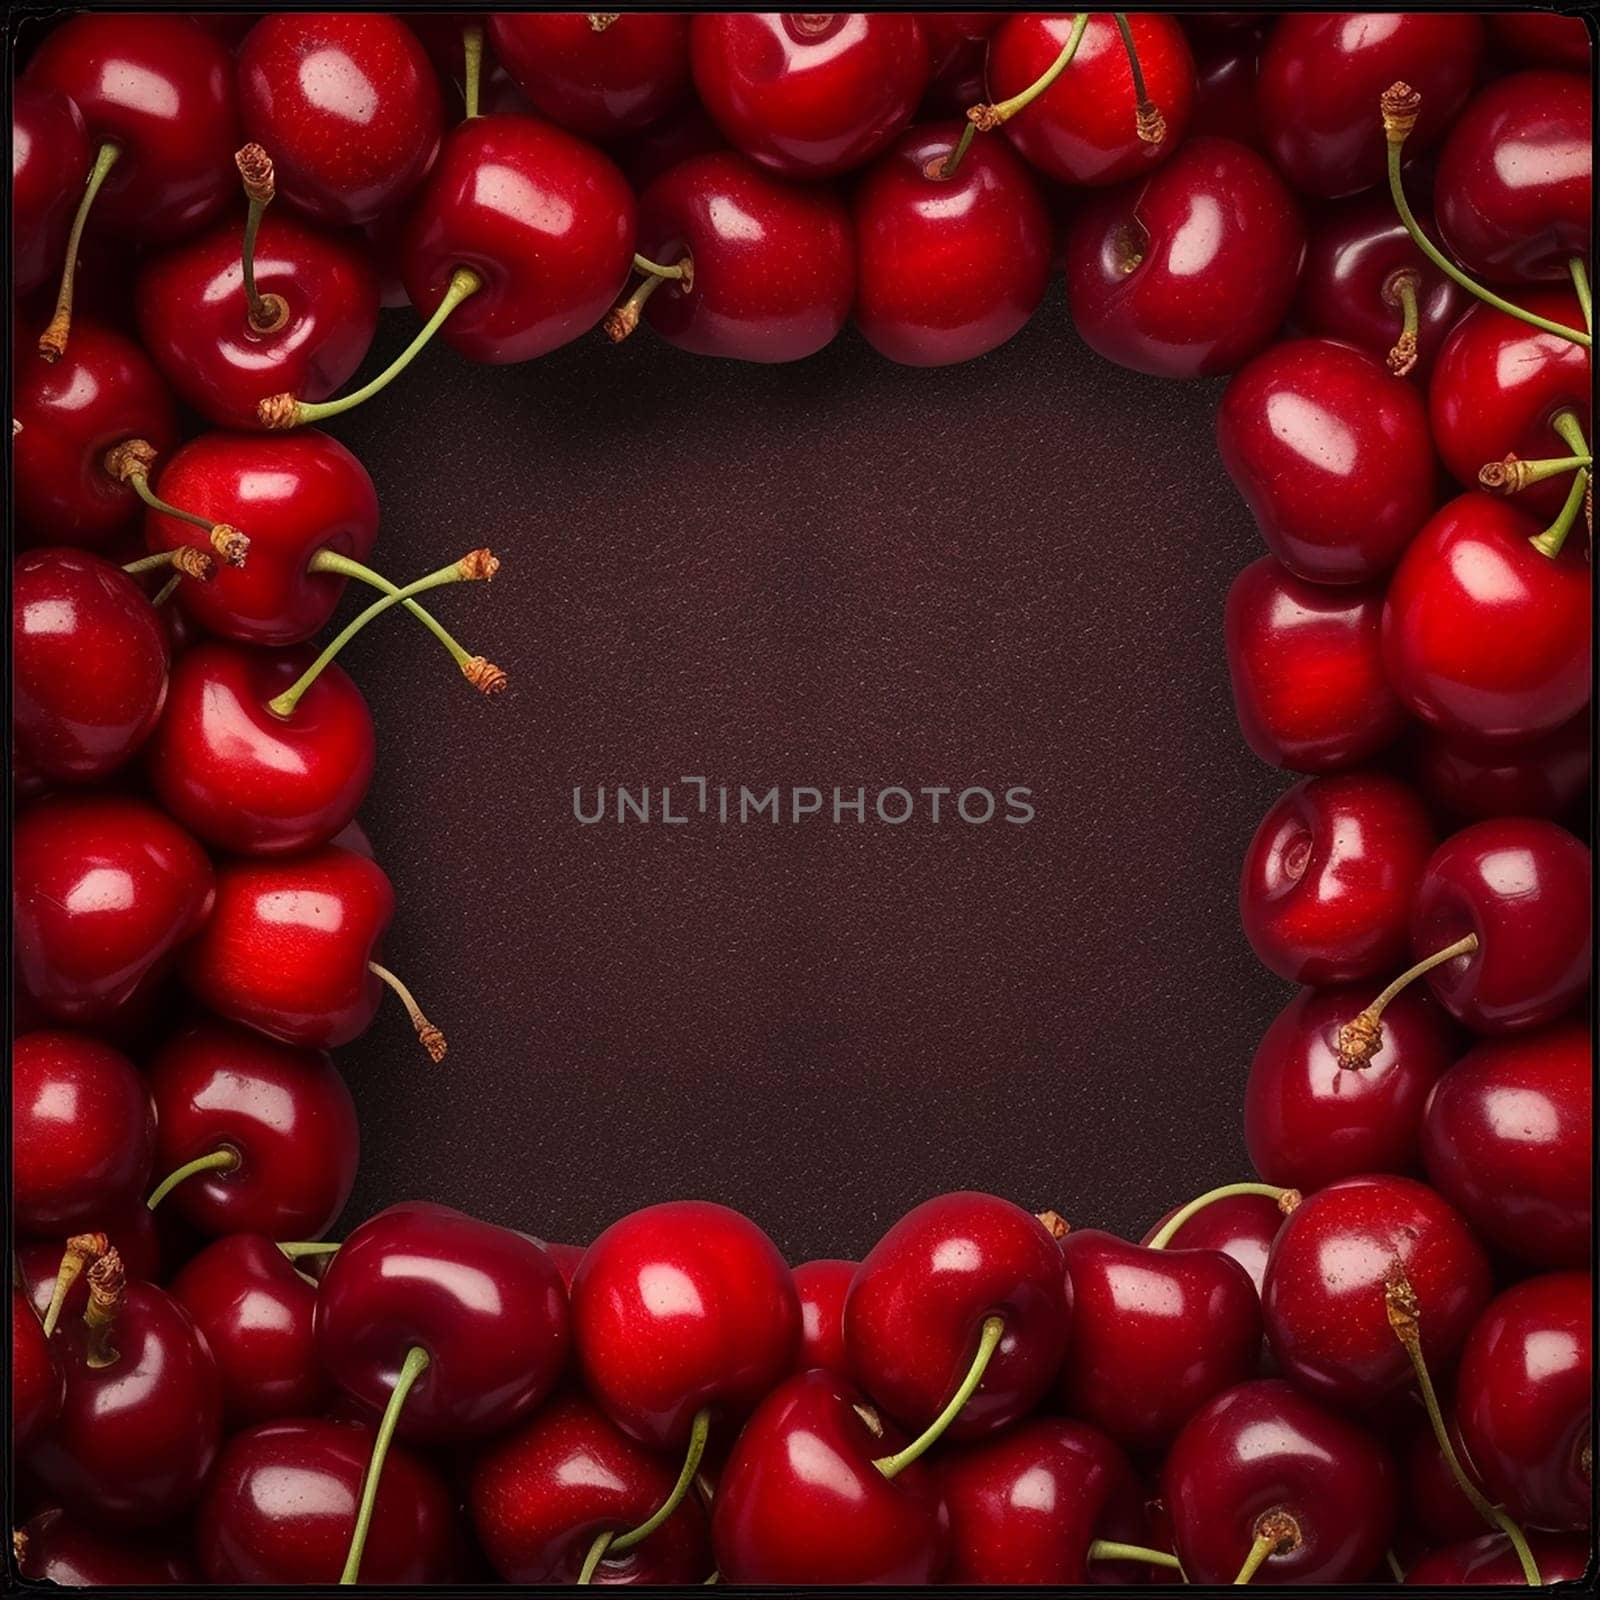 Circle of fresh red cherries on a dark background by Hype2art